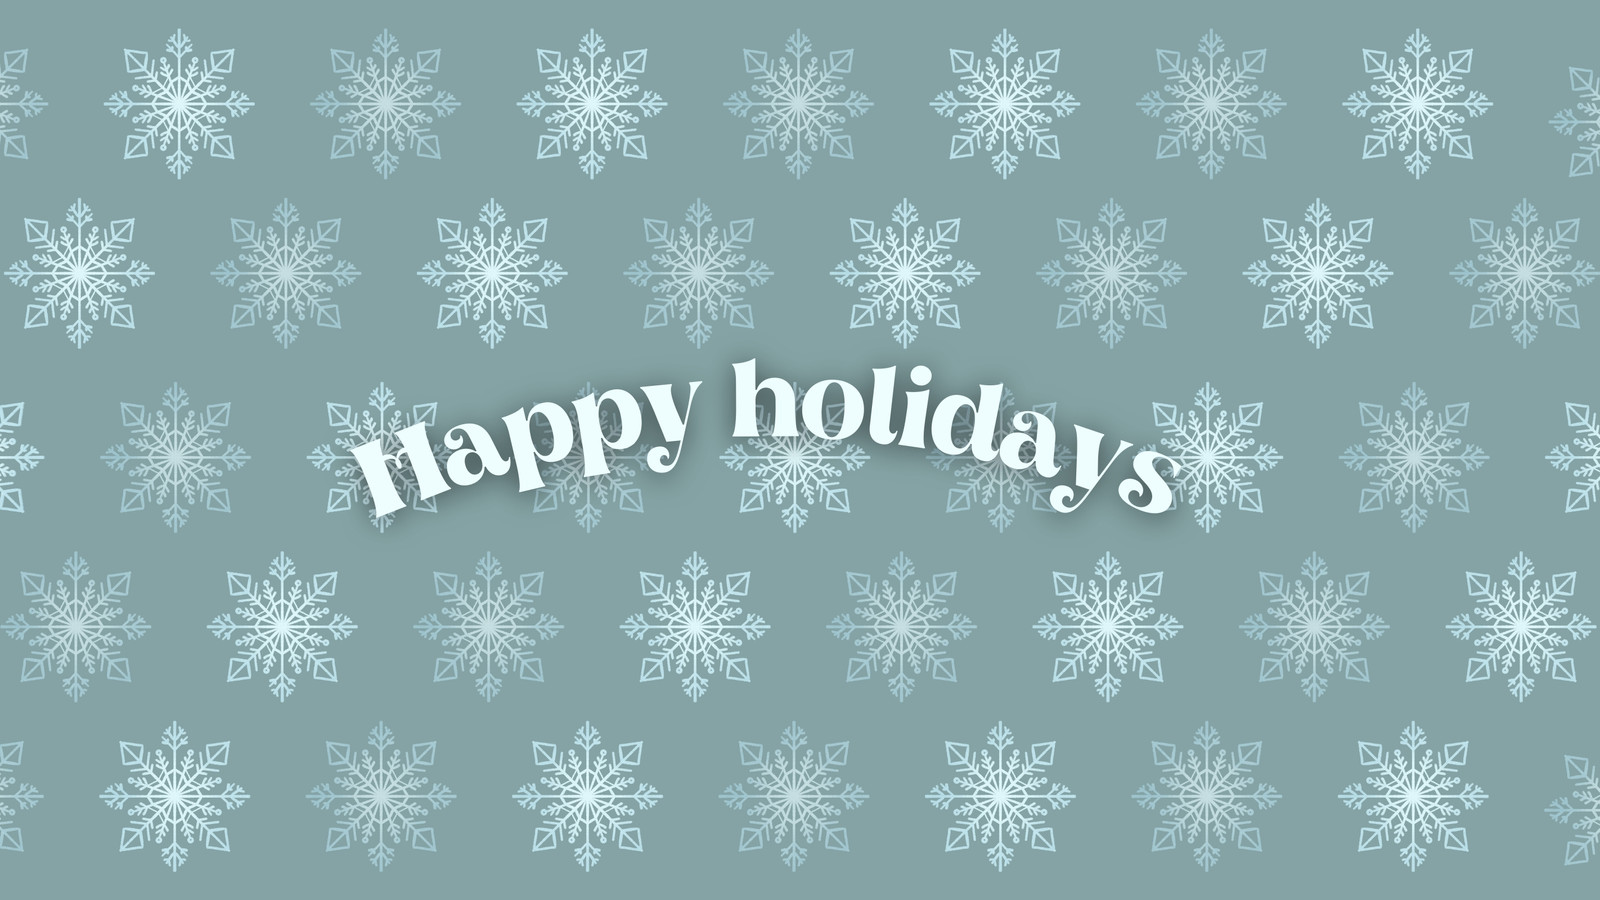 Page 13 - Free and customizable happy holidays templates